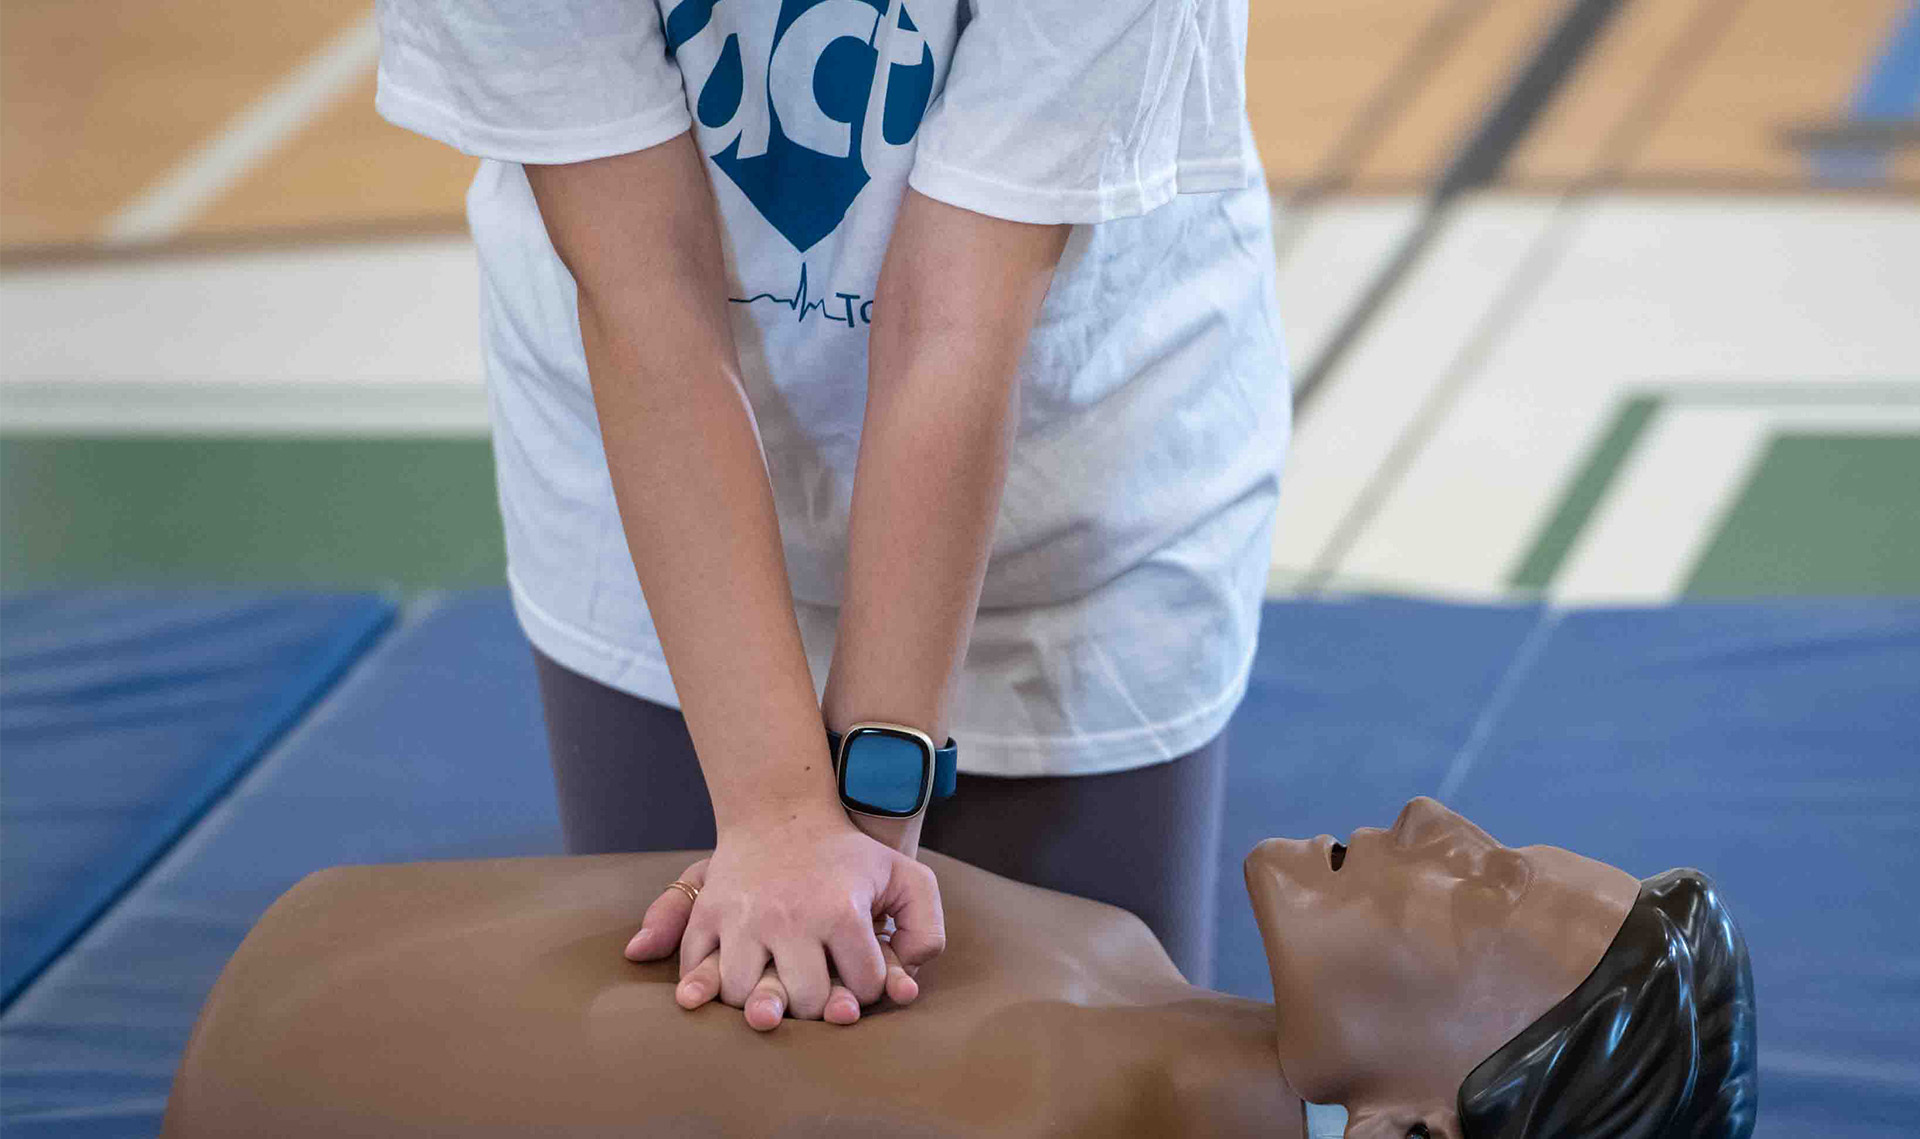 Student practices CPR on mannequin